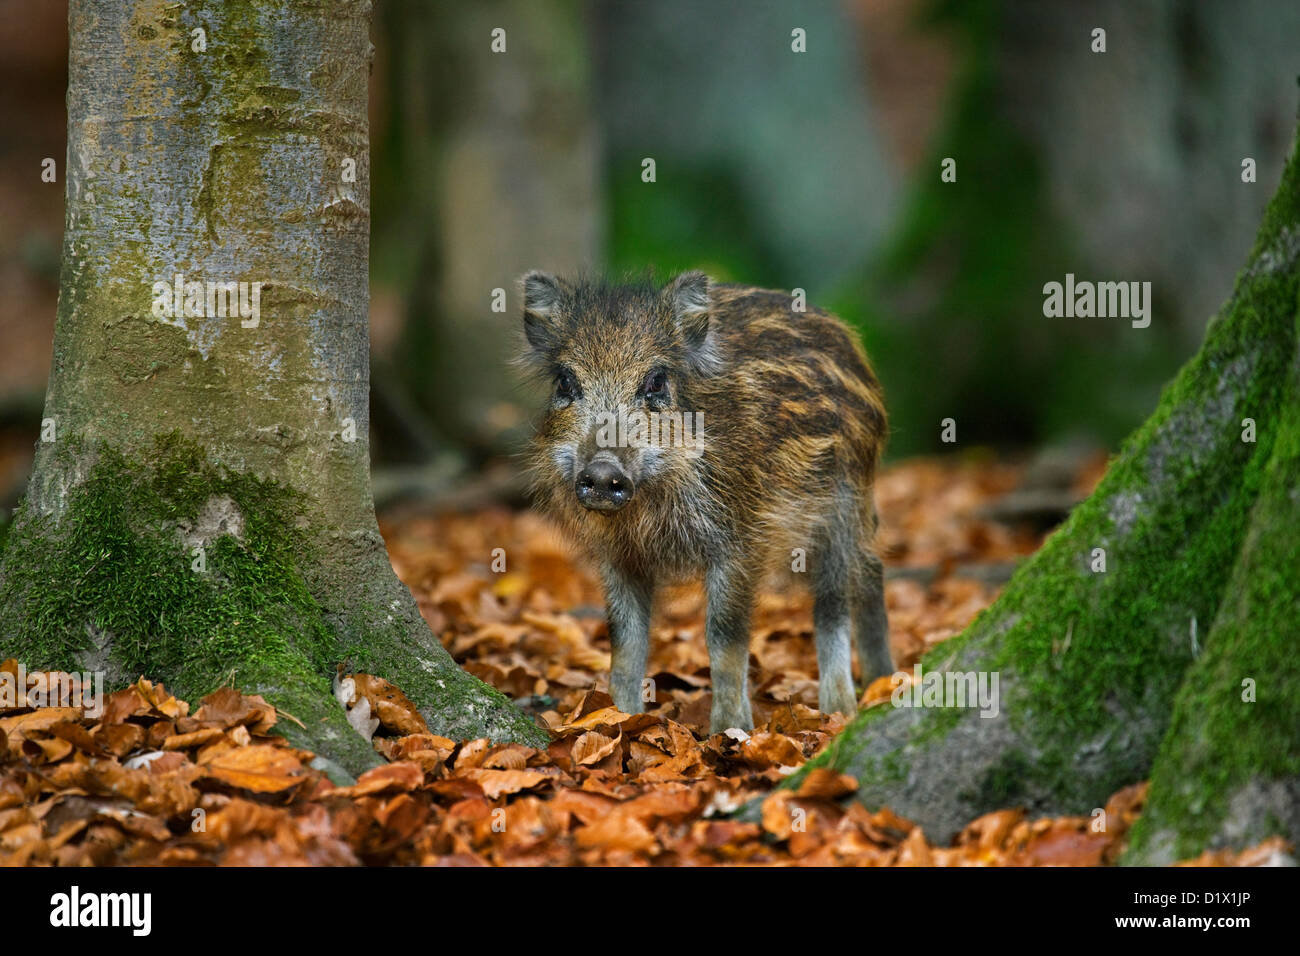 Wild boar (Sus scrofa) piglet with striped coat in autumn forest in the Belgian Ardennes, Belgium Stock Photo